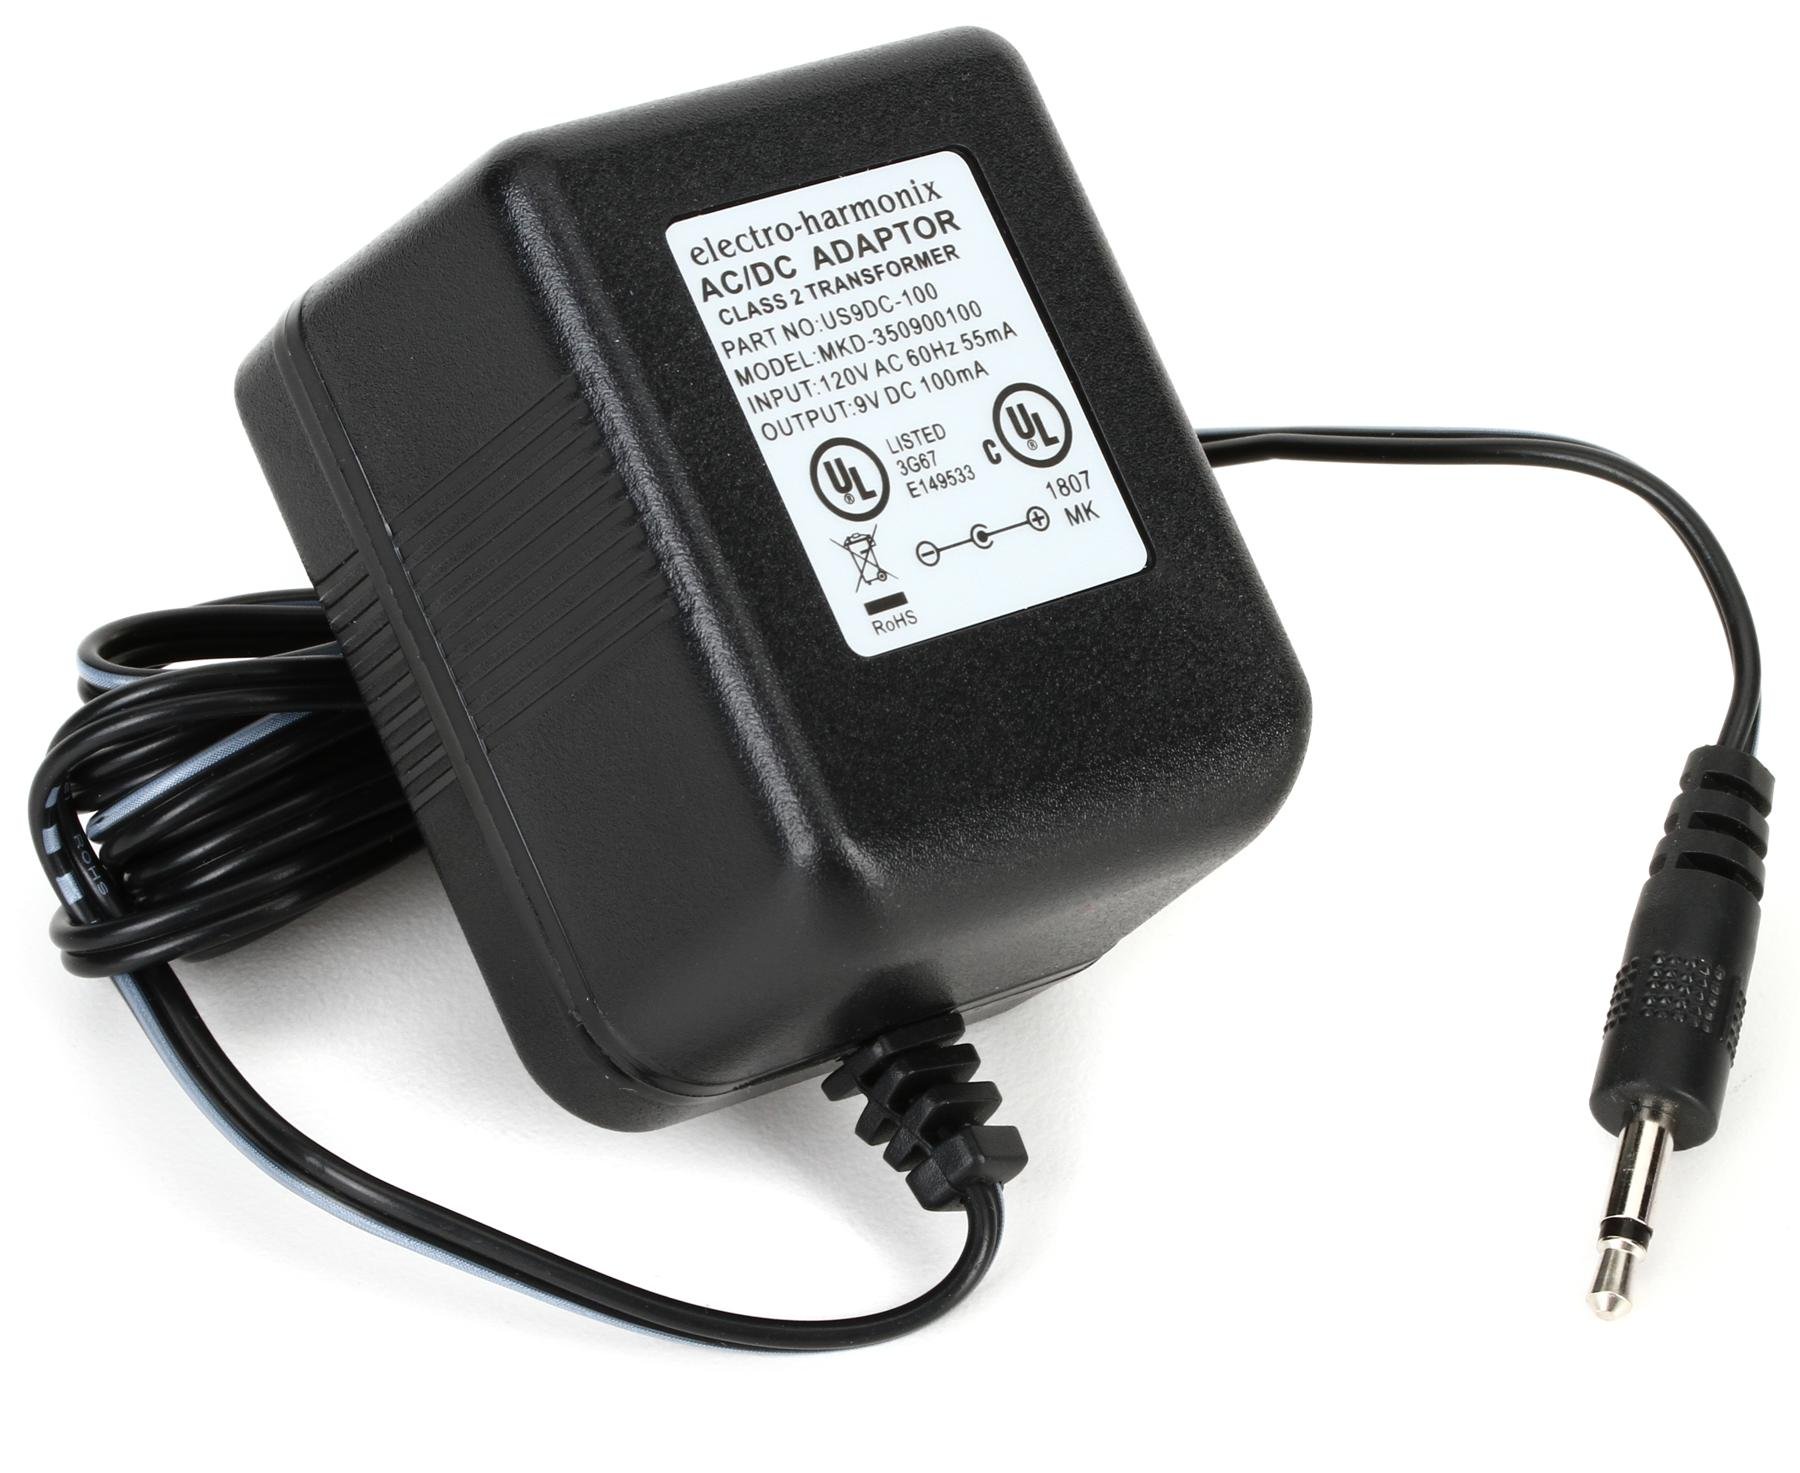 AC DC Power Supply Adapter for Electro-harmonix 22 Caliber Power Amp